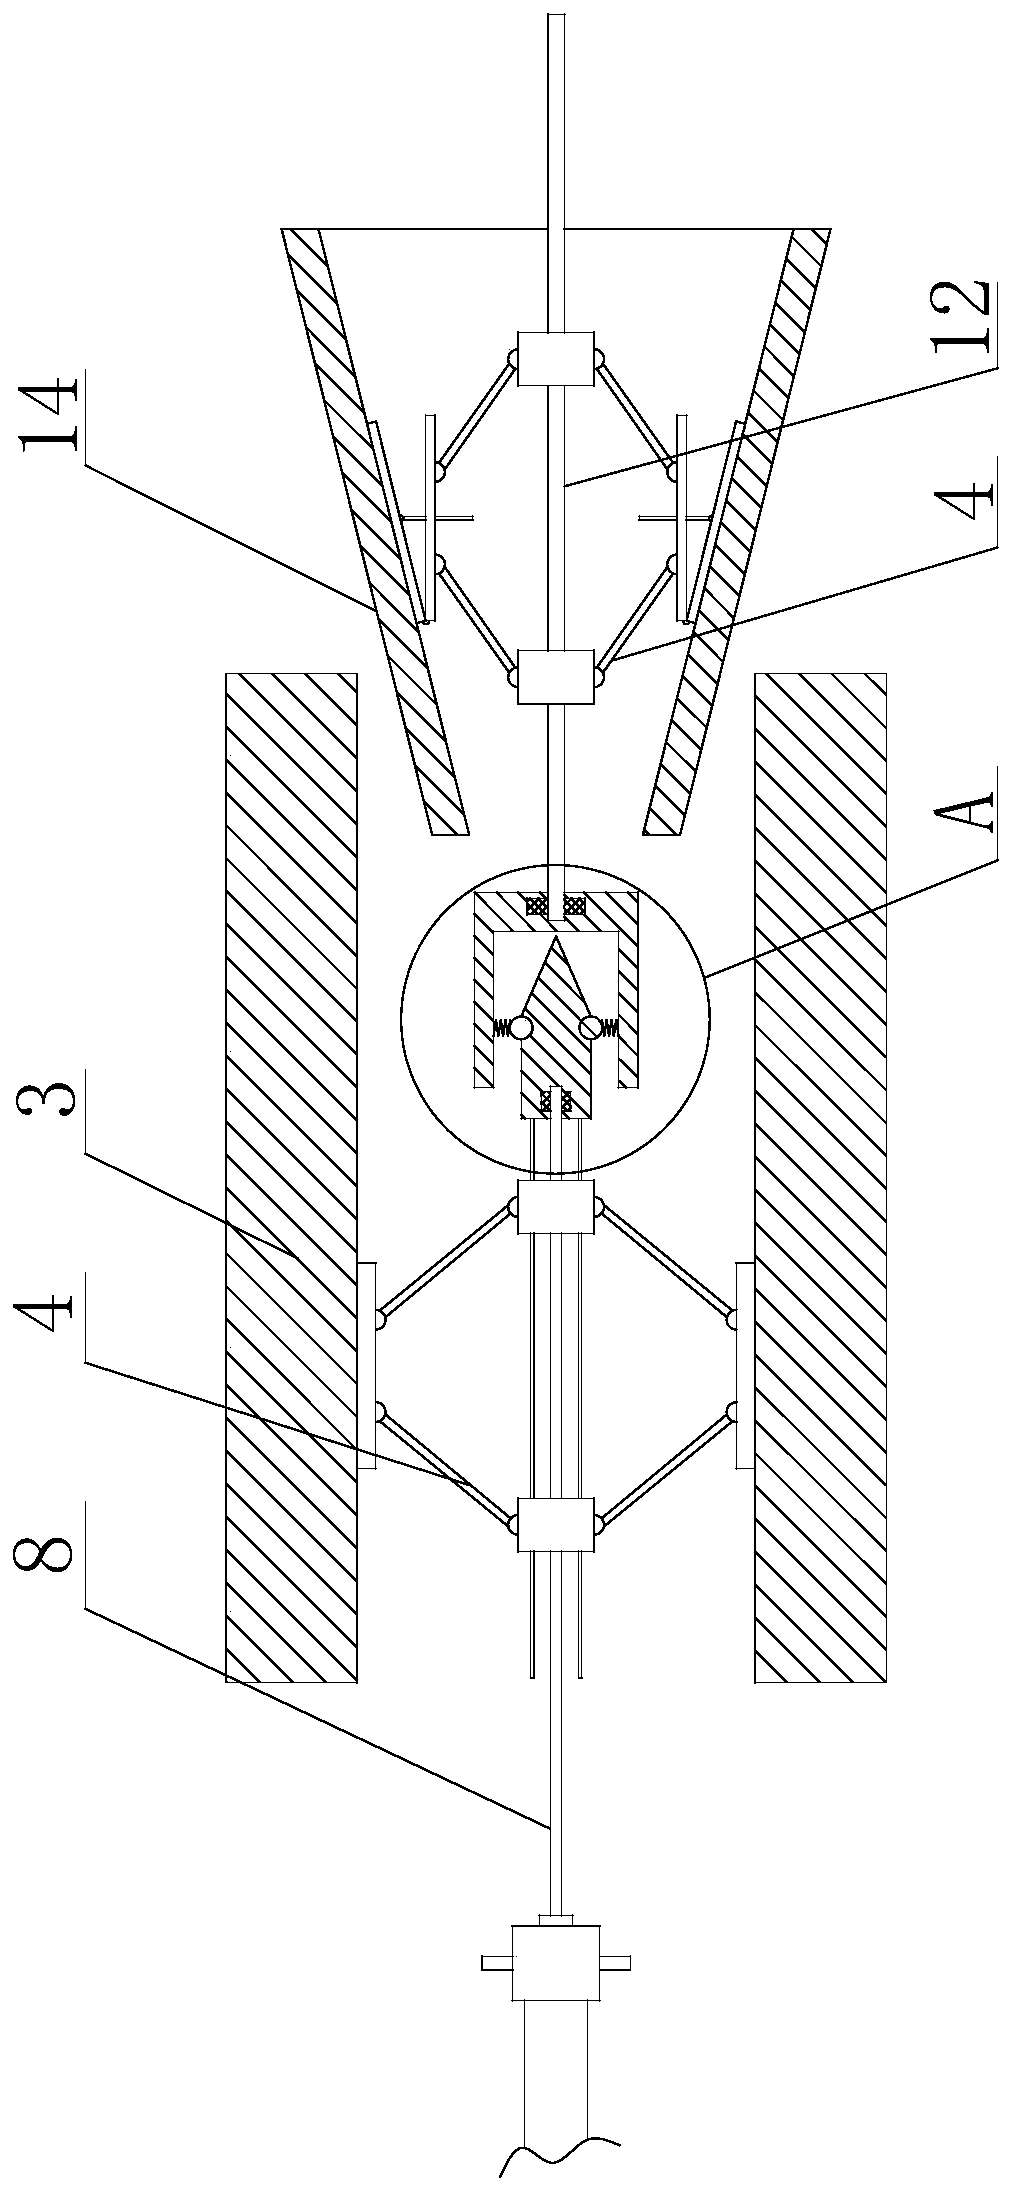 Auxiliary device based on application of reducing mold of horizontal annular knitting machine